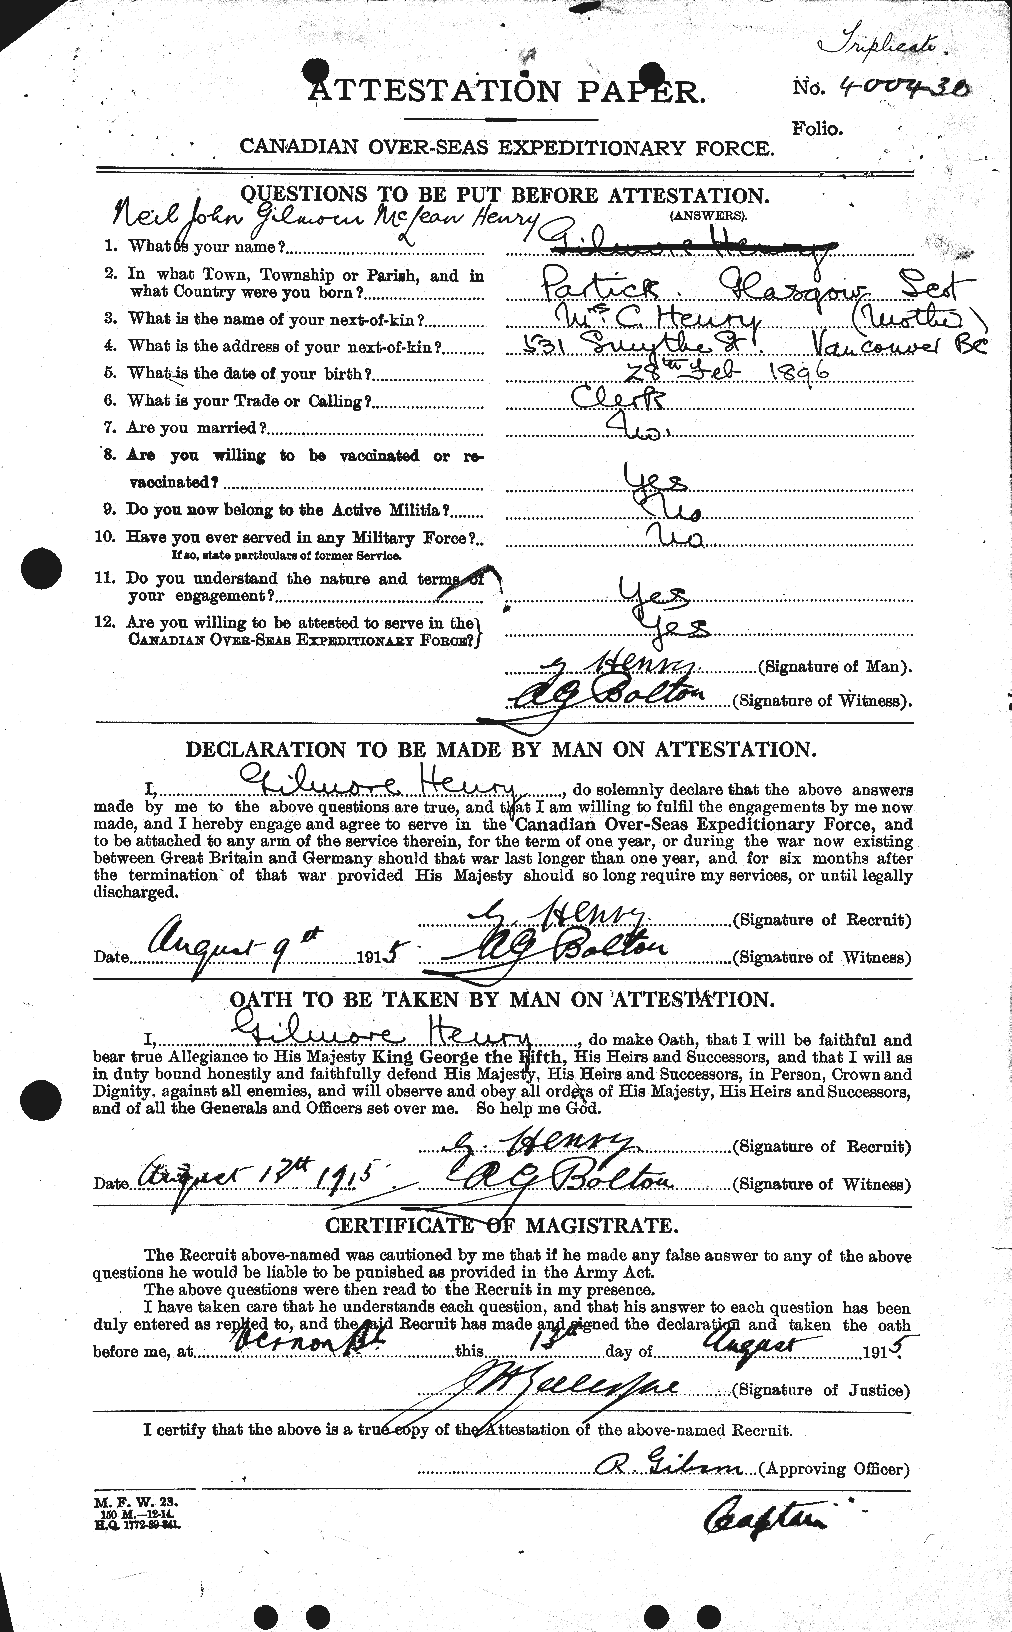 Personnel Records of the First World War - CEF 387671a